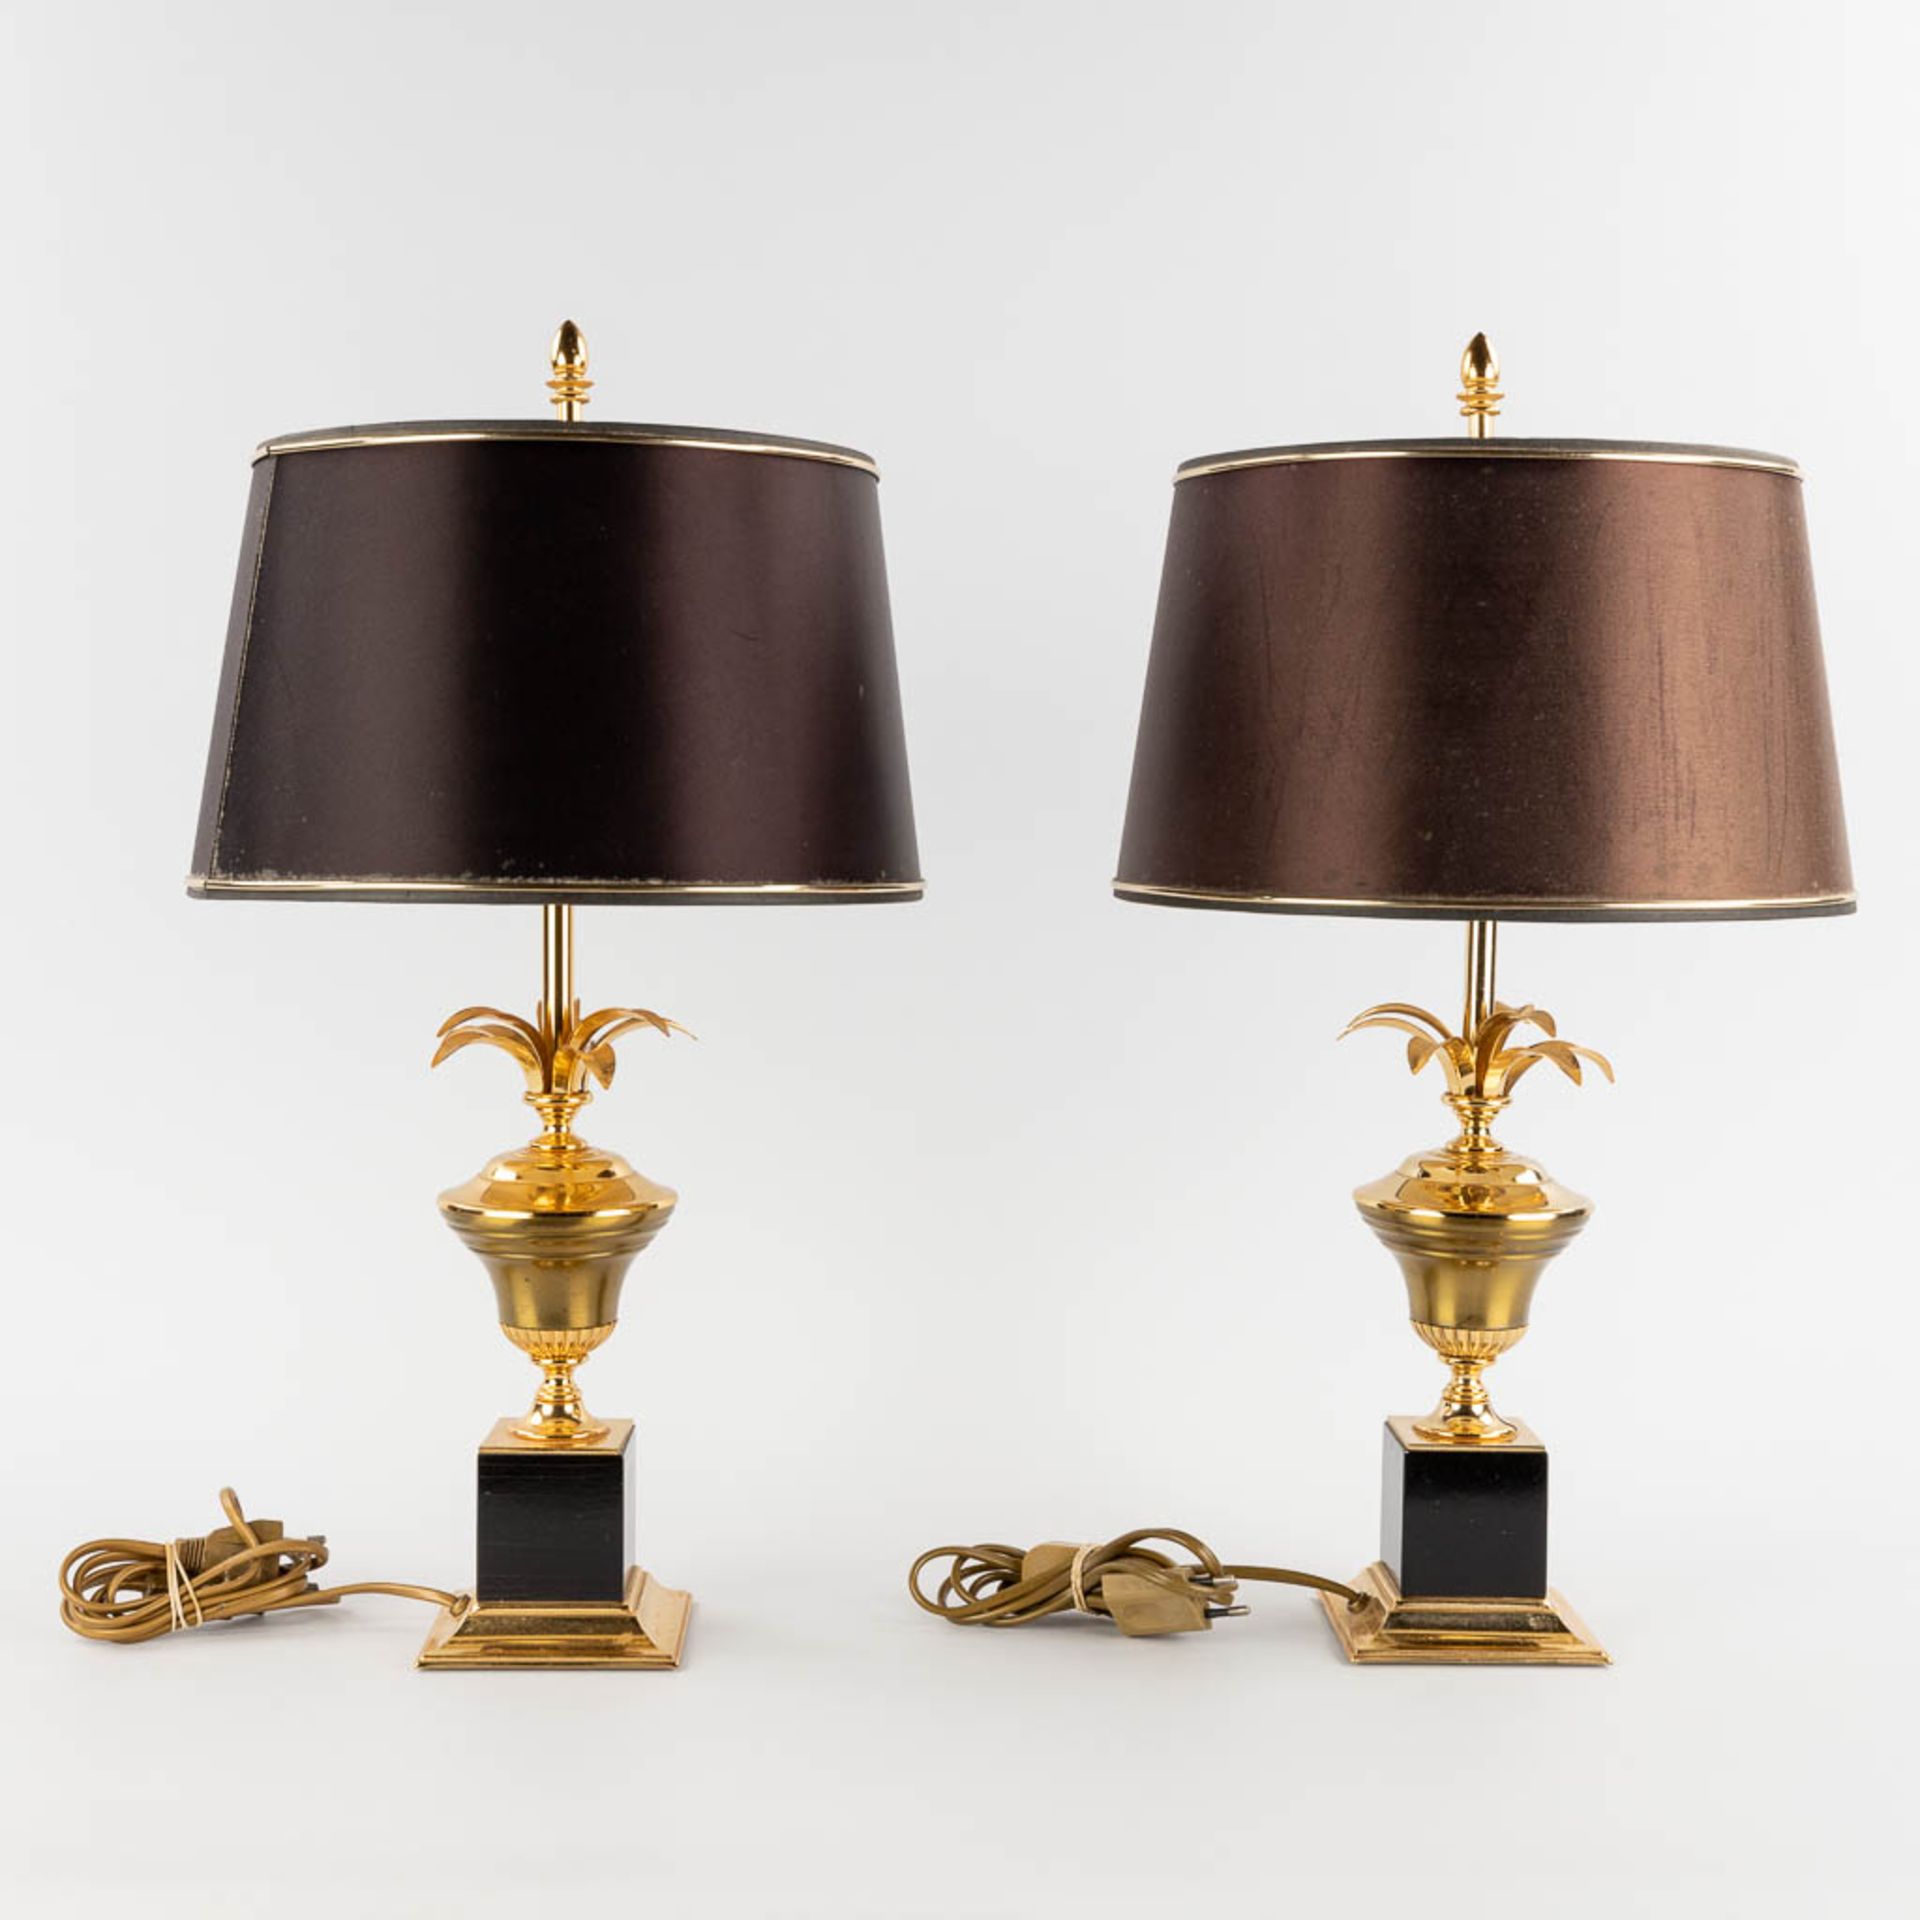 A pair of table lamps, Hollywood Regency style. 20th C. (H:54 x D:30 cm) - Image 3 of 10